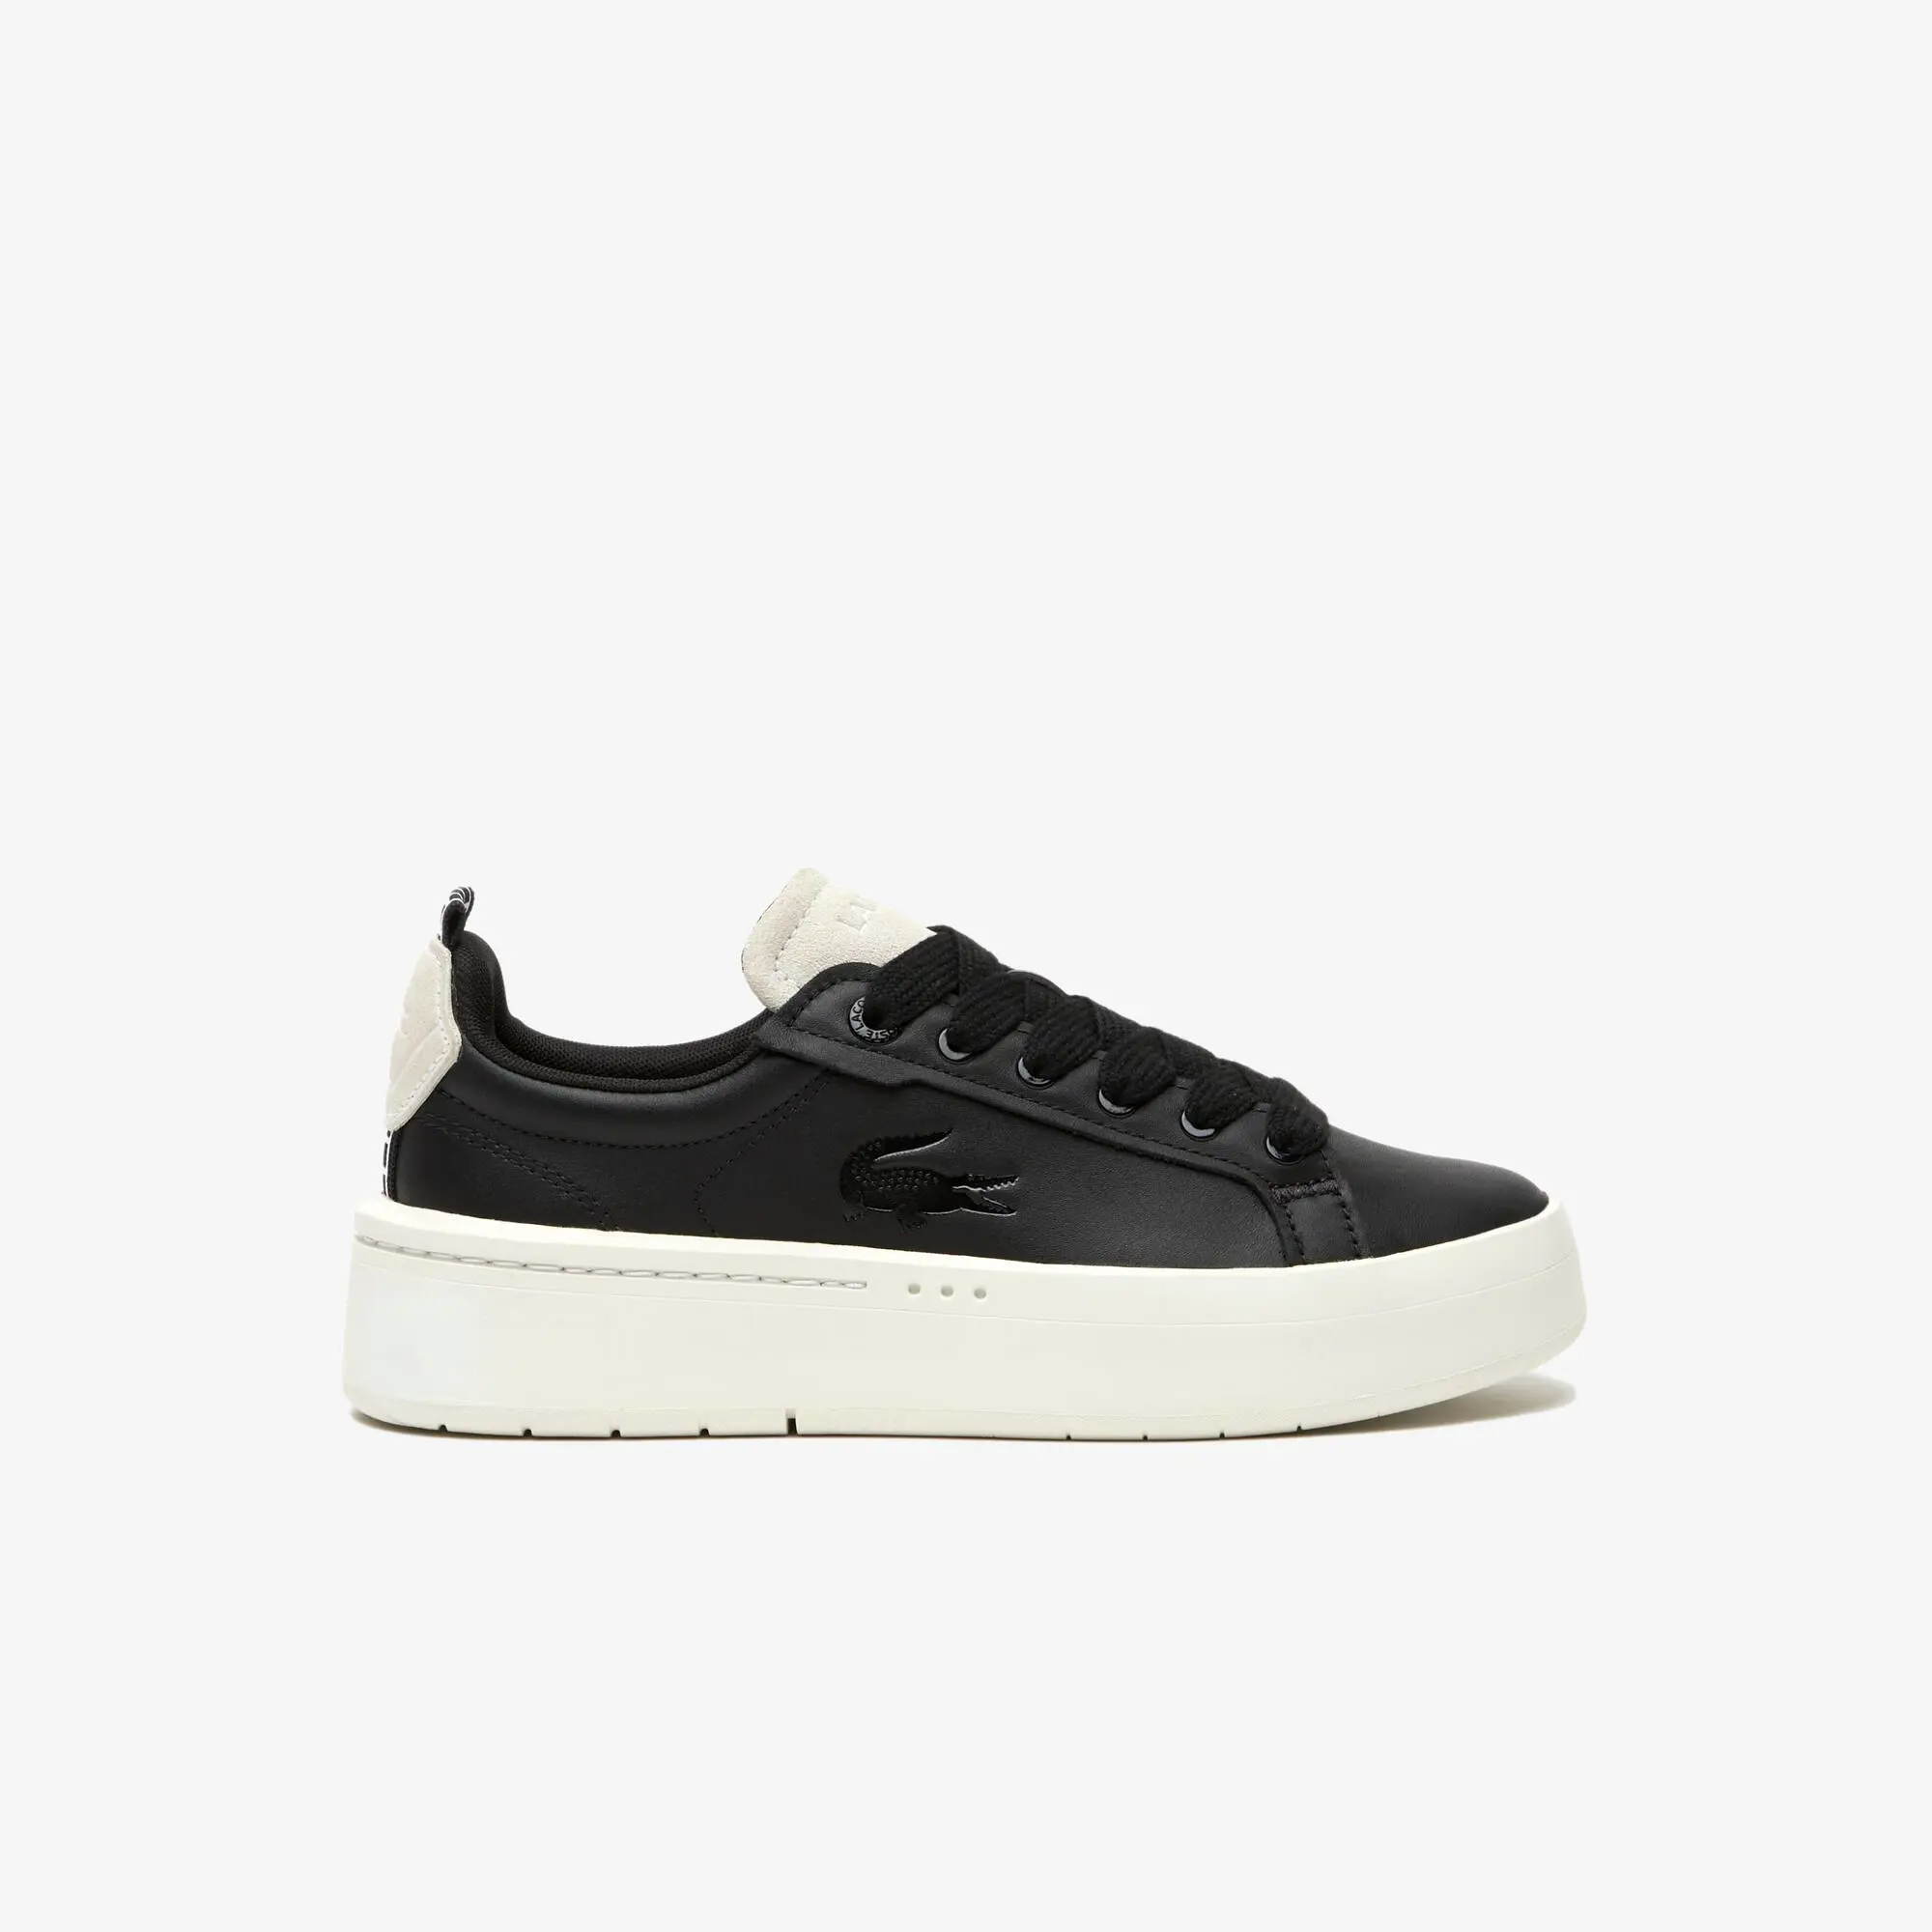 Lacoste Women's Carnaby Platform Leather Sneakers. 1